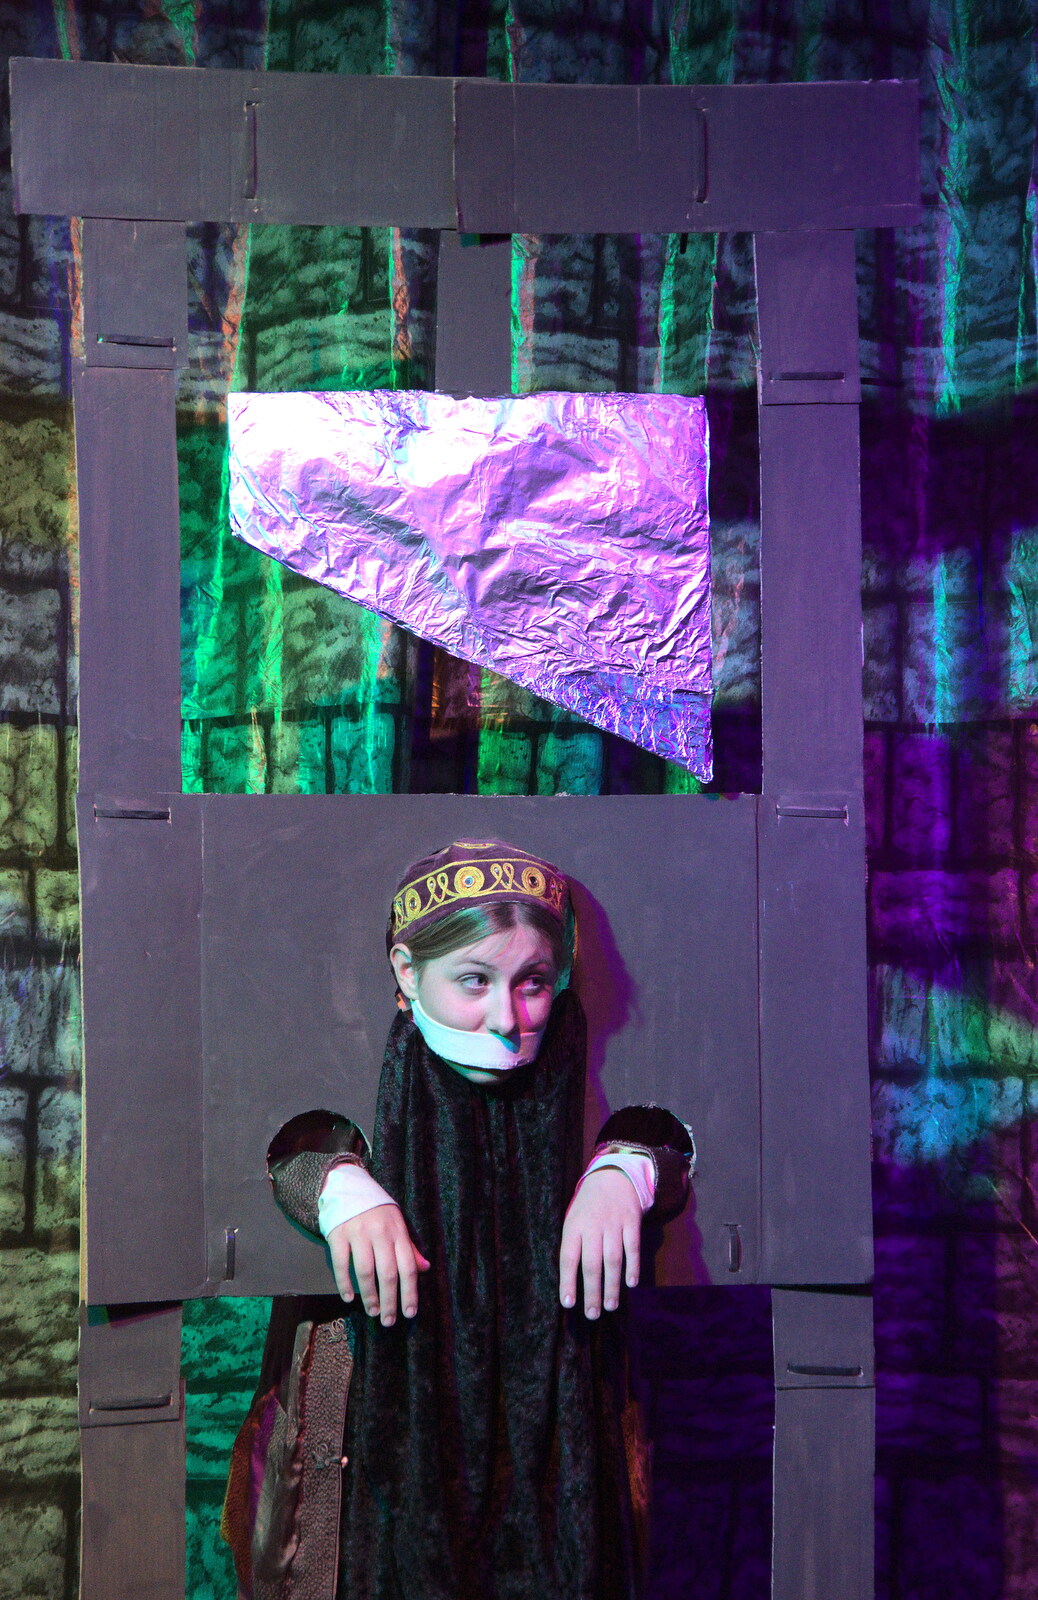 Sophie's in the guillotine from Dove Players do Aladdin, Eye, Suffolk - 10th December 2022